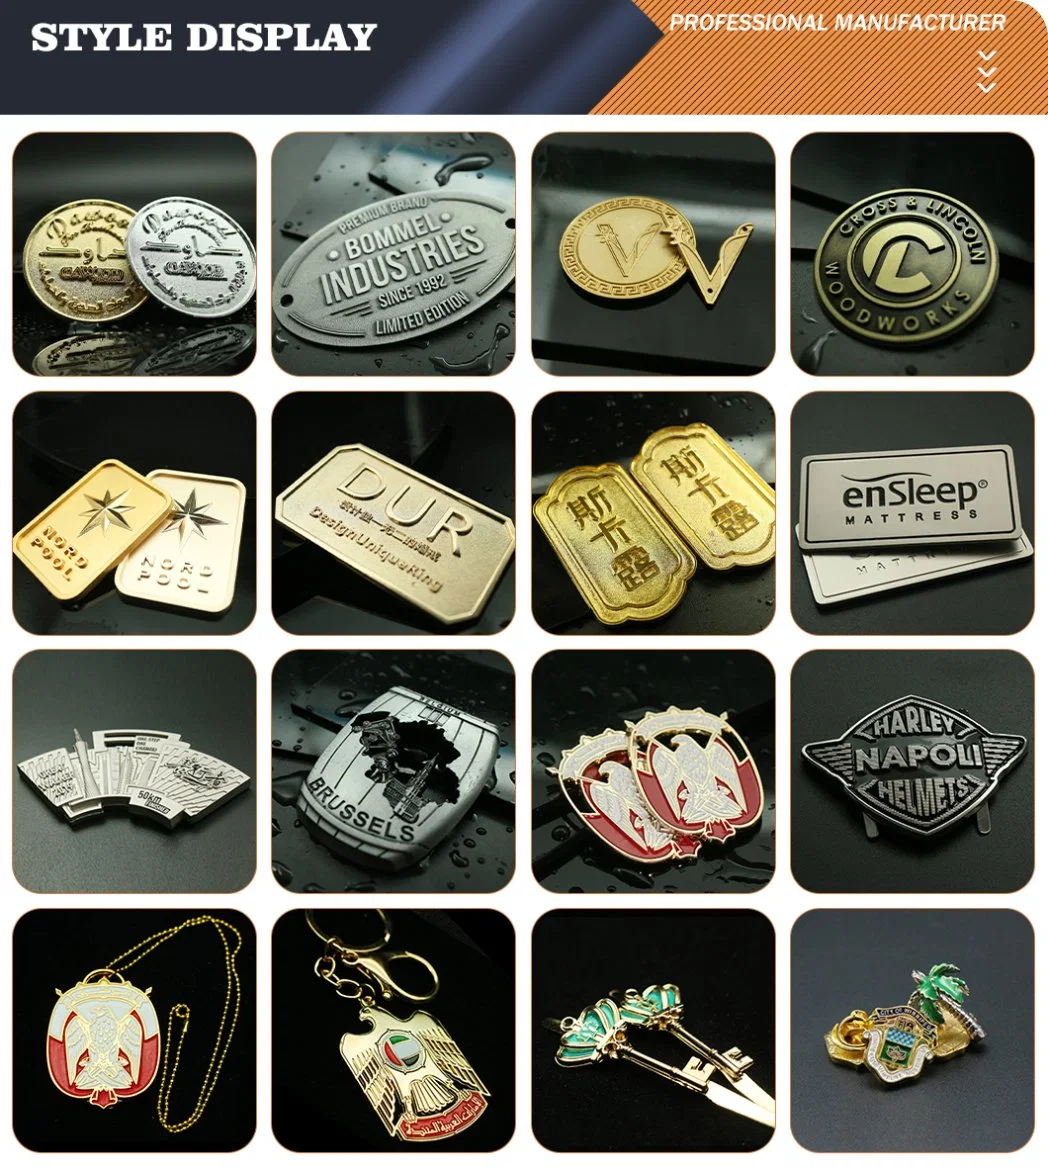 Metal Craft Advertising Brand Logo Product Label Pet Medallion Car Number Emblem Plate Coin Key Tag Fob Anime